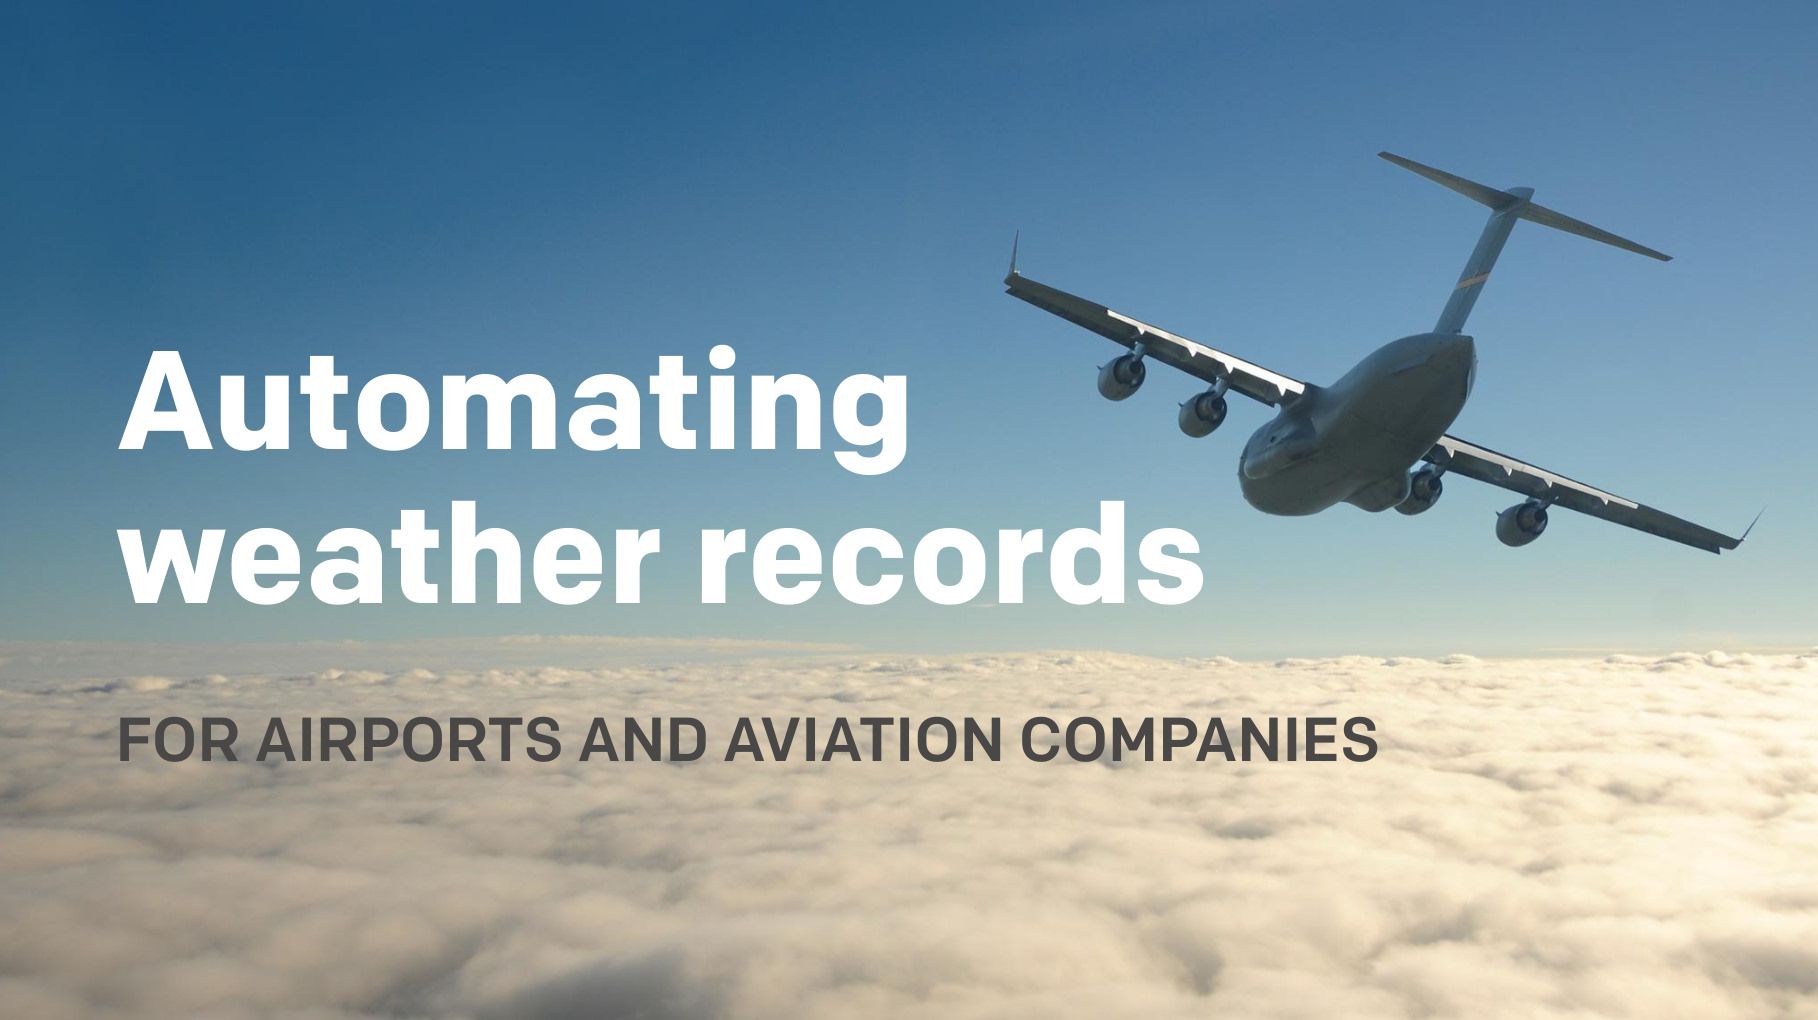 Automating weather records for airports and aviation companies